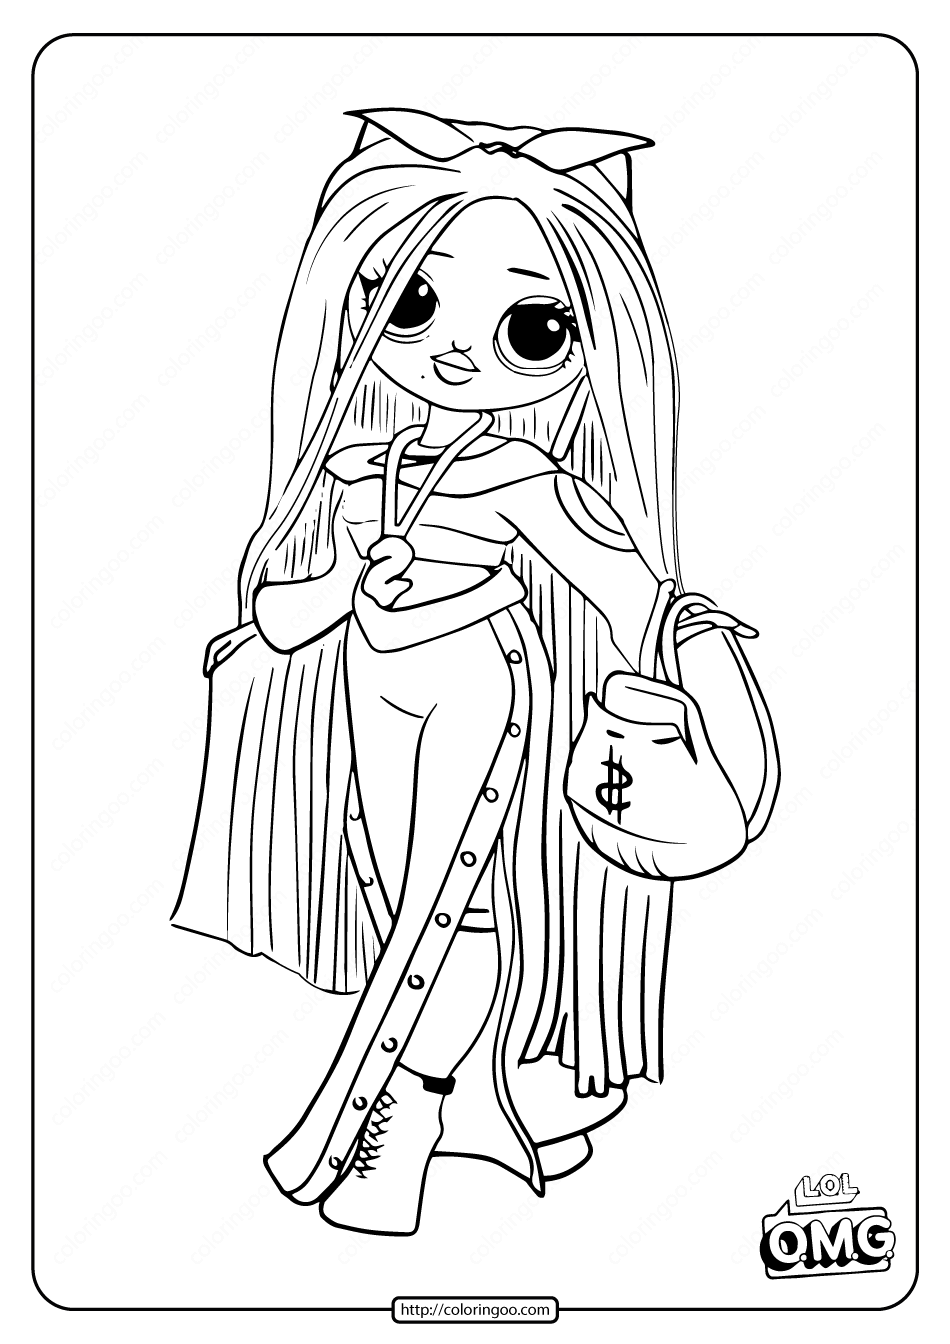 LOL Coloring Pages FREE Printable 112